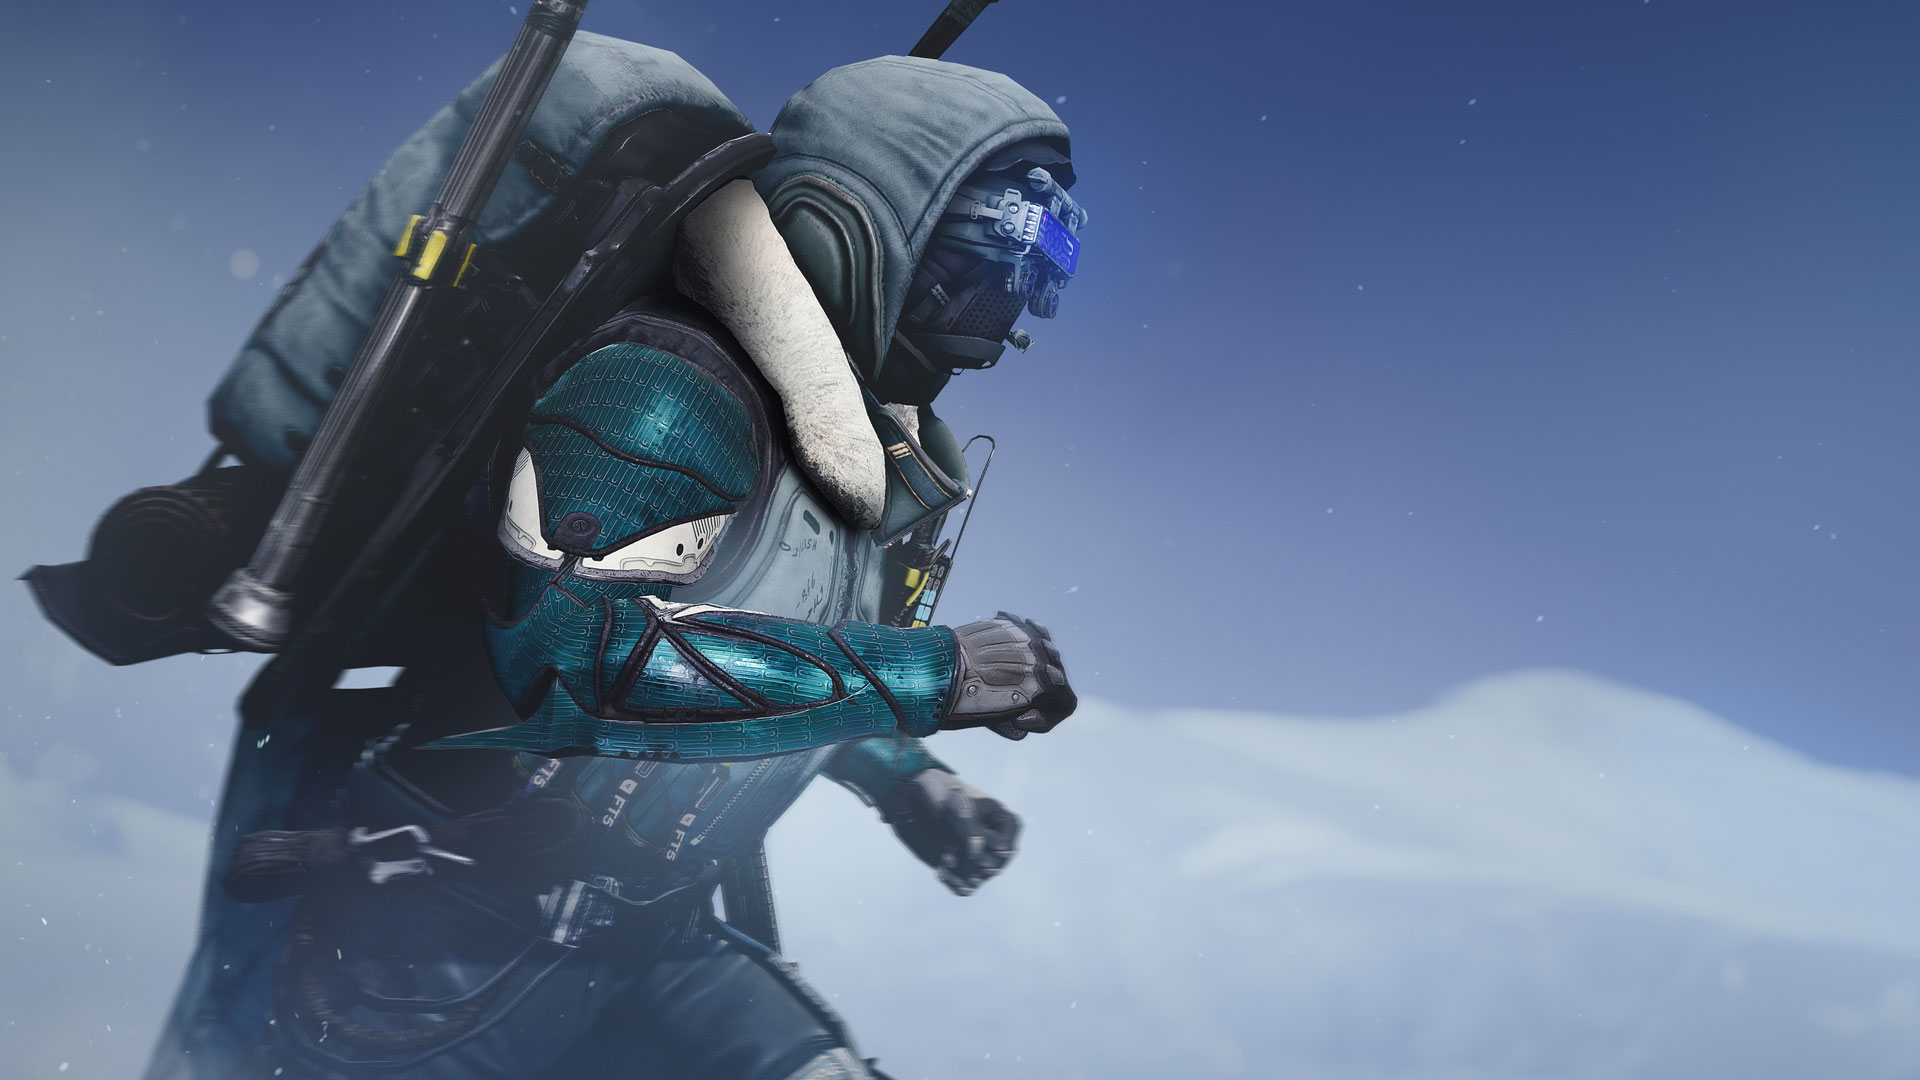 Destiny 2 Beyond Light Exotic armor: A Hunter running through a snowy environment with Athrys's Embrace.